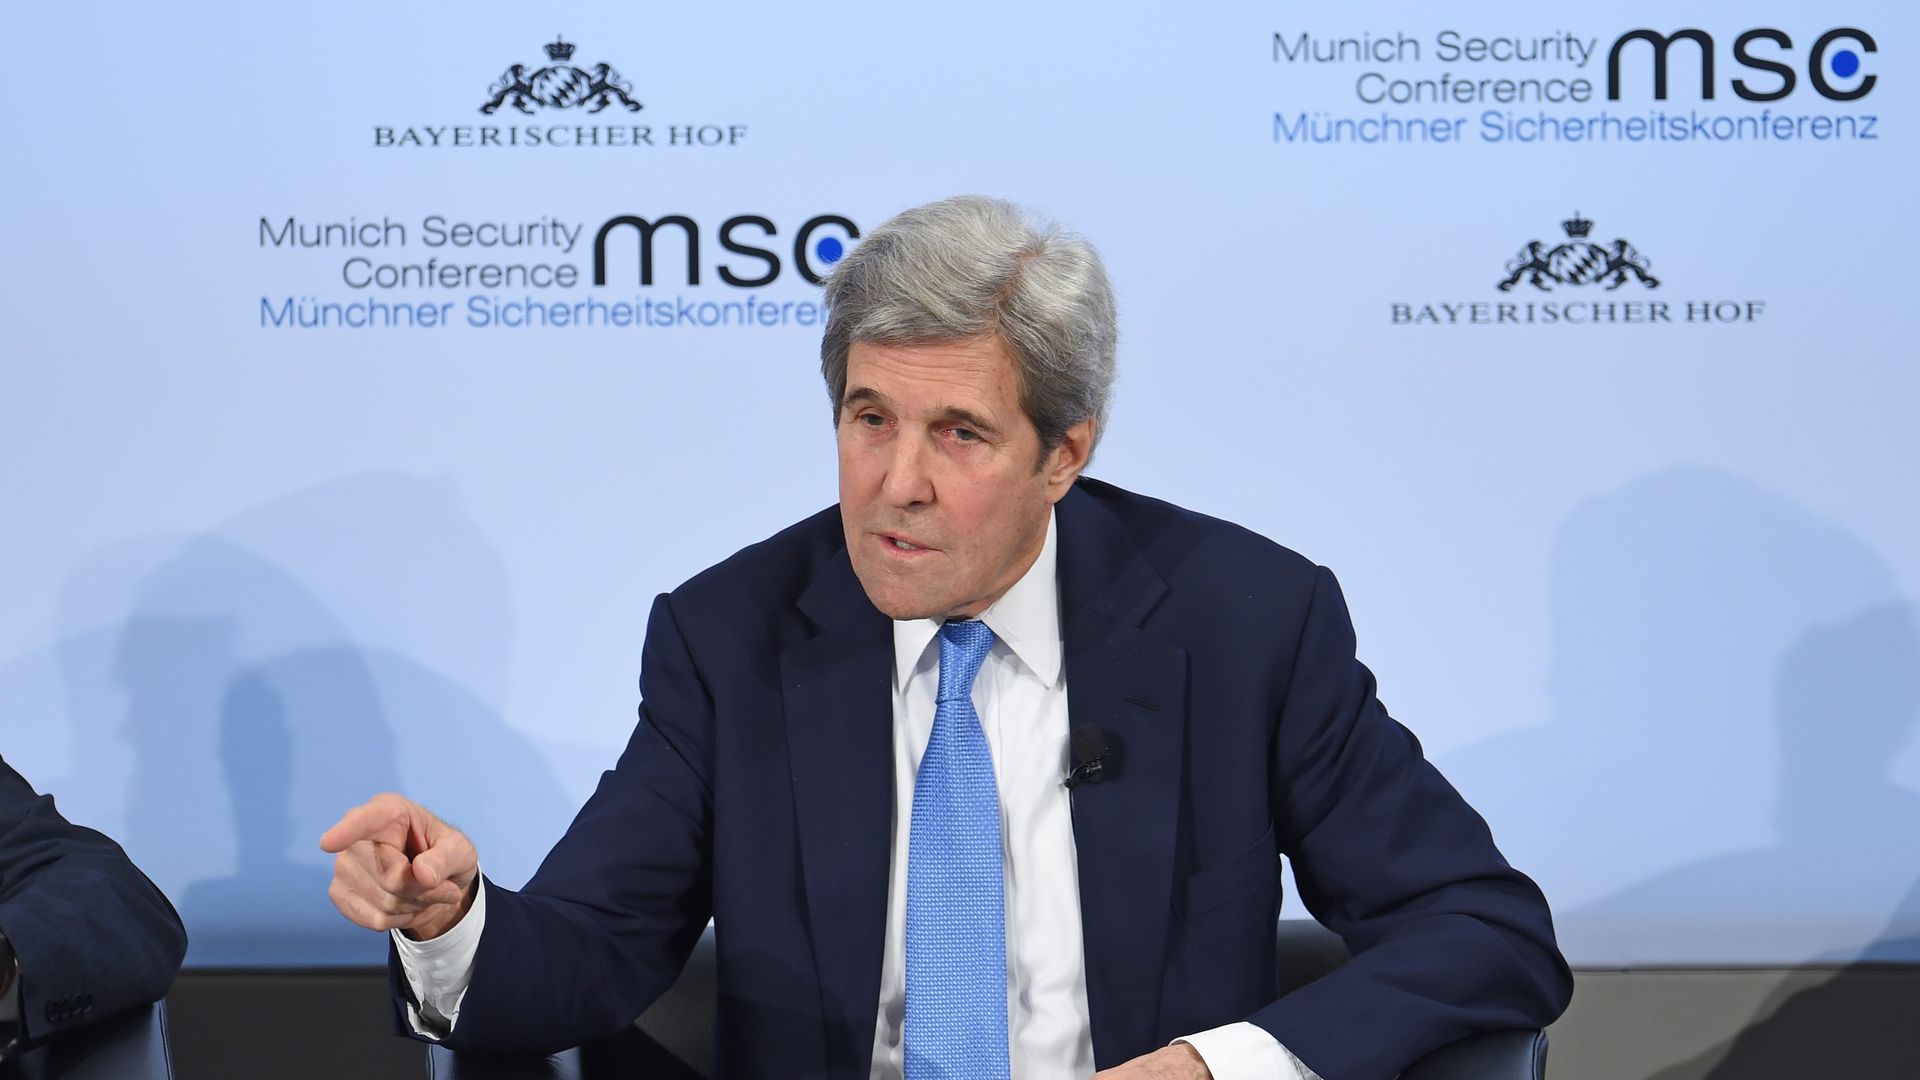 Kerry gestures while speaking, seated, on stage